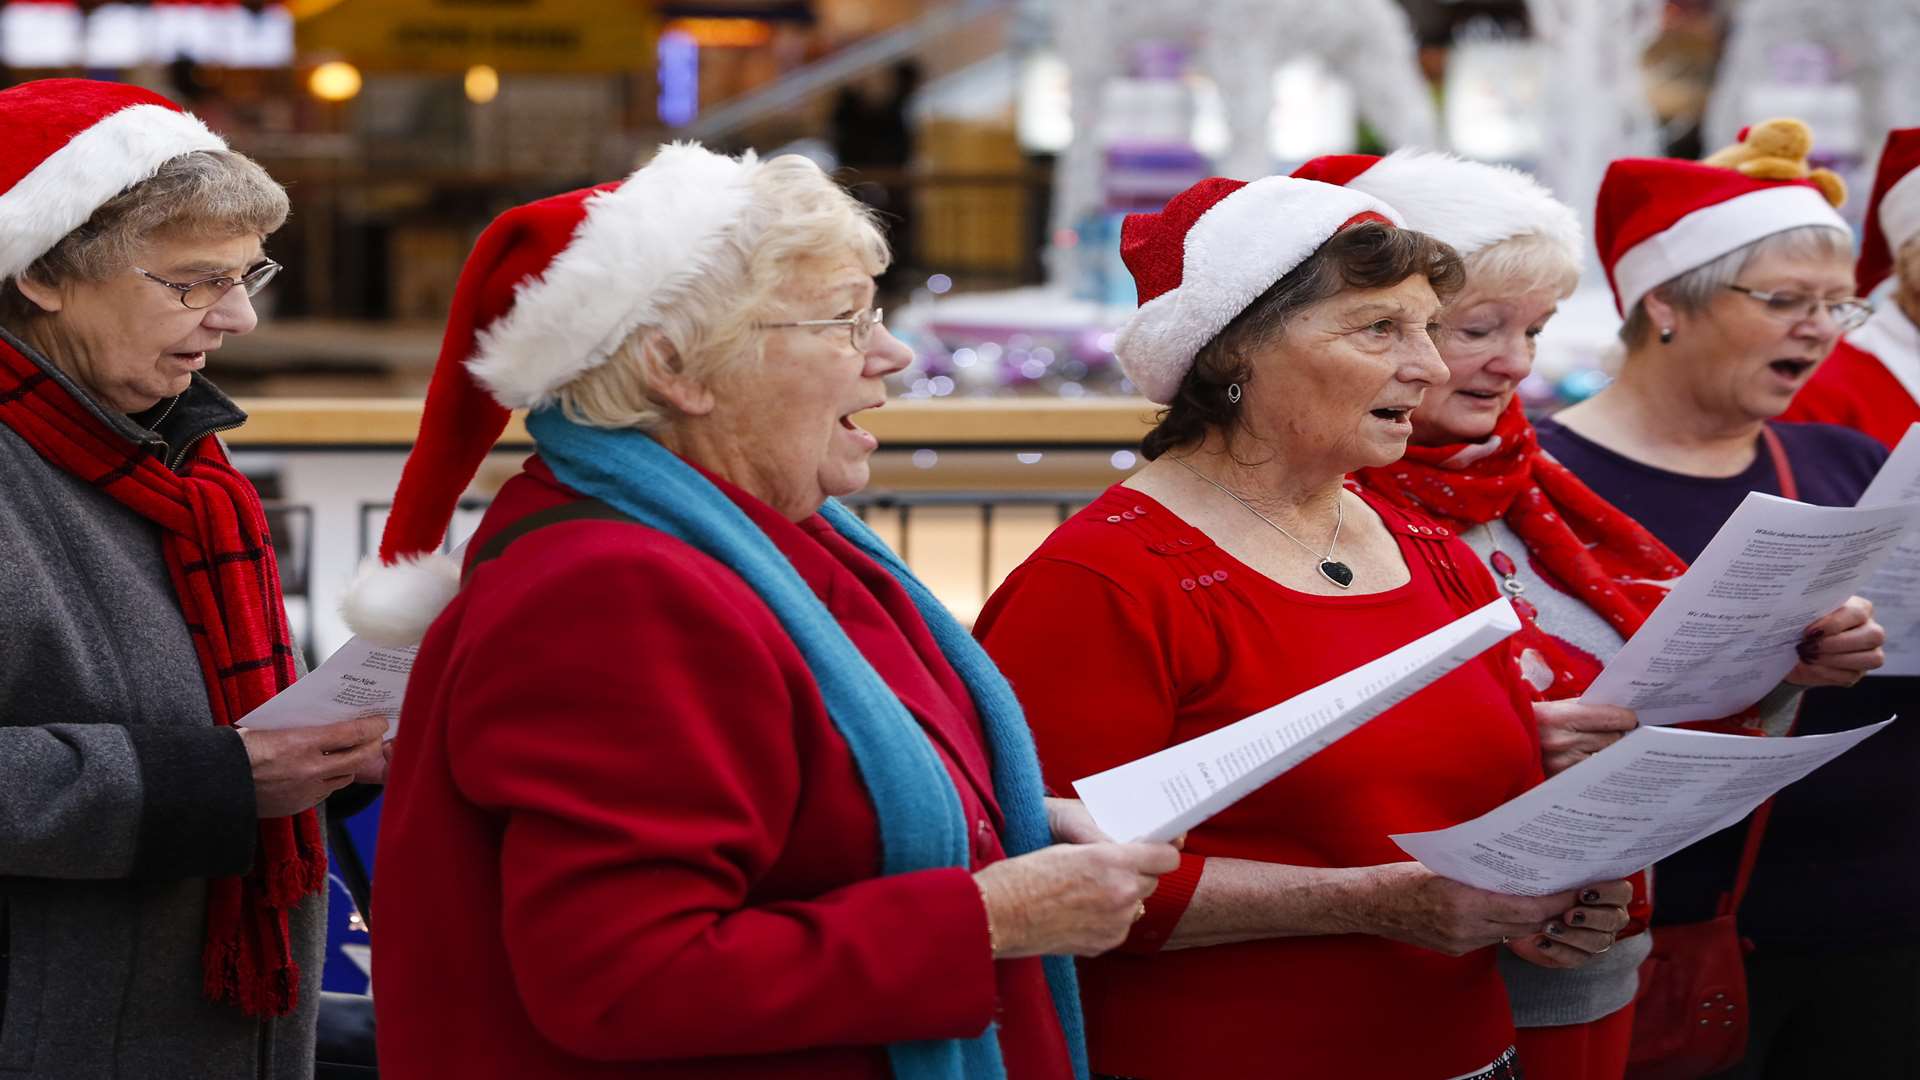 Traditional carols and fun songs were sung. Picture: Martin Apps